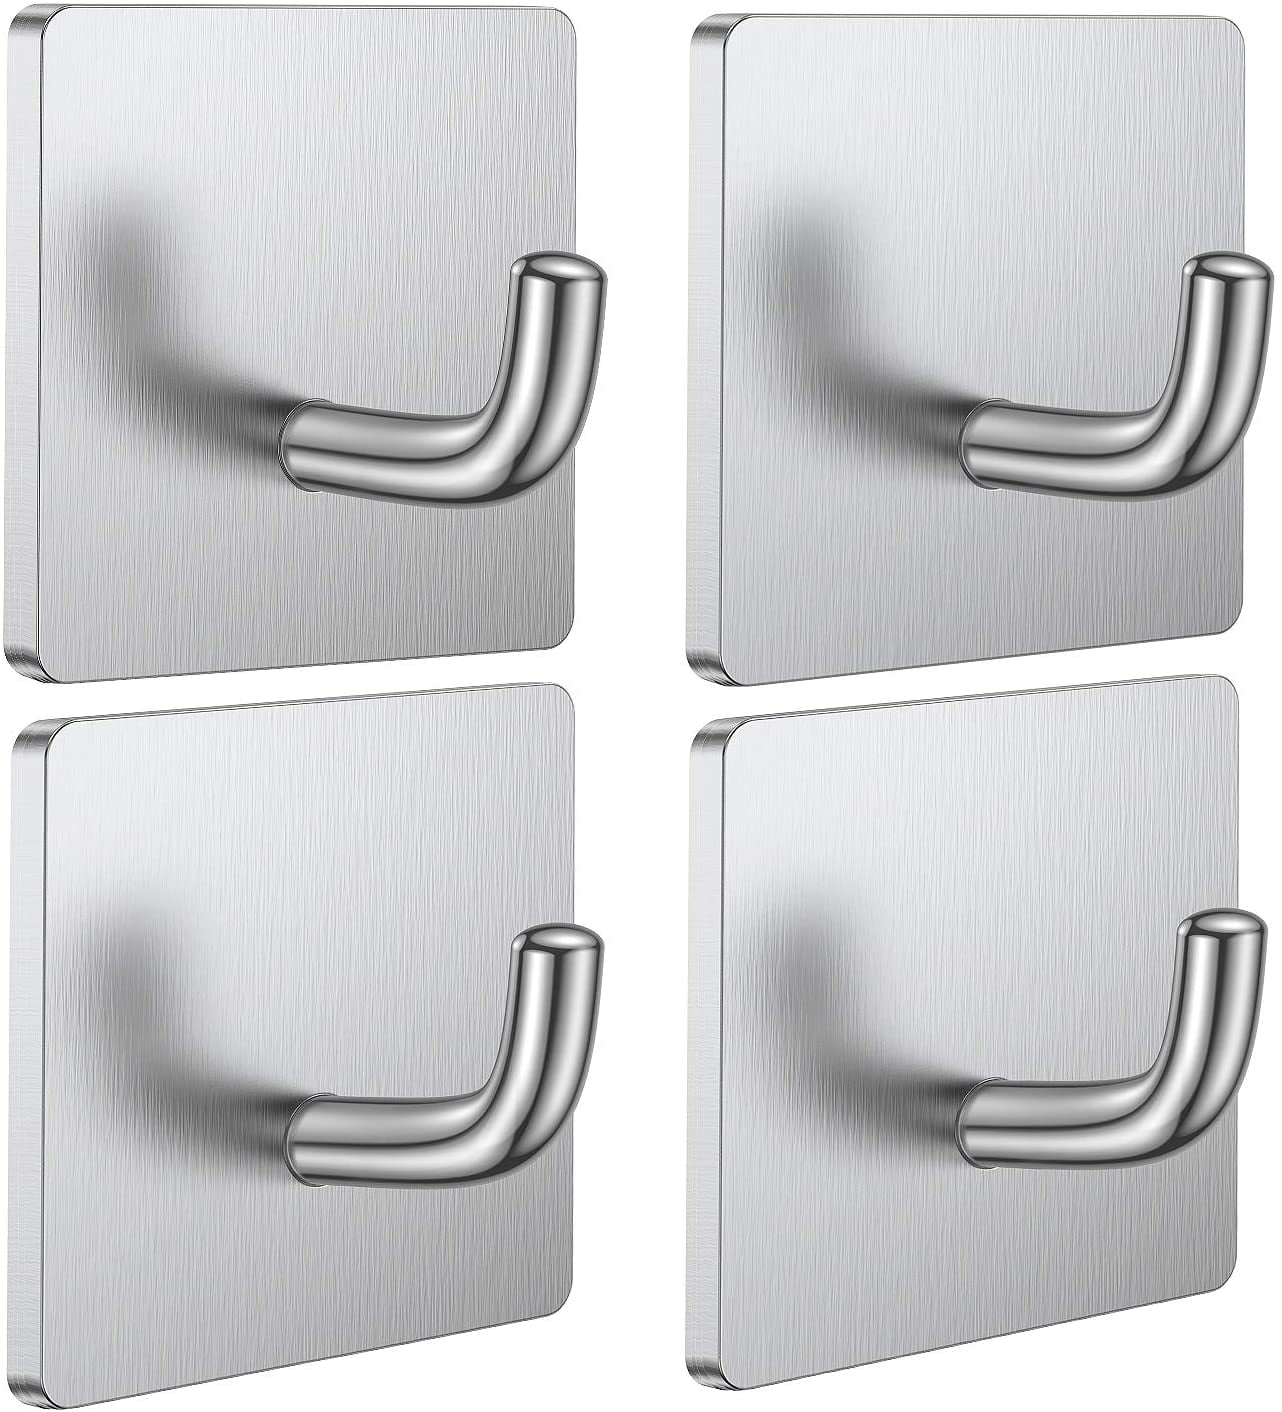 2Pcs Strong Alloy Self Adhesive Hooks Strong Sticky Stick on Wall Door Hooks New 